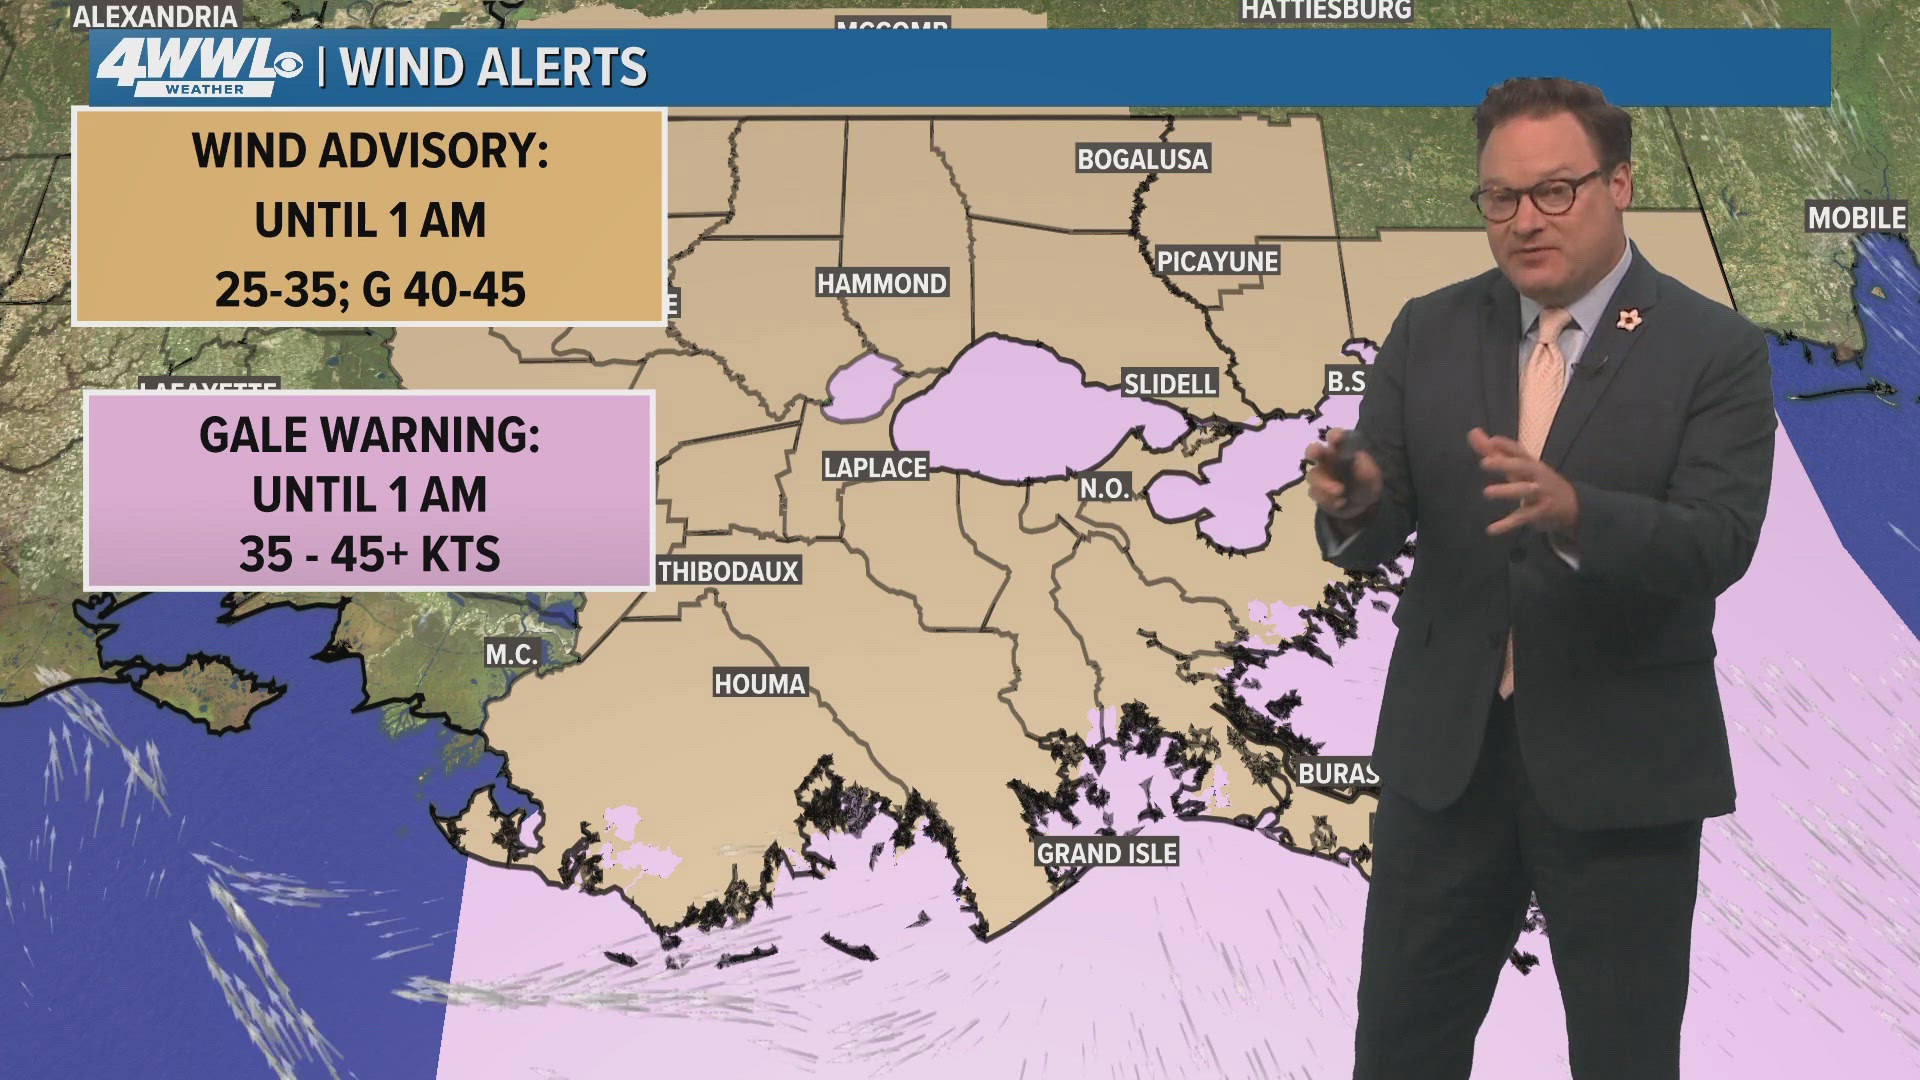 Late afternoon weather update from WWL Louisiana Chief Meteorologist Chris Franklin.